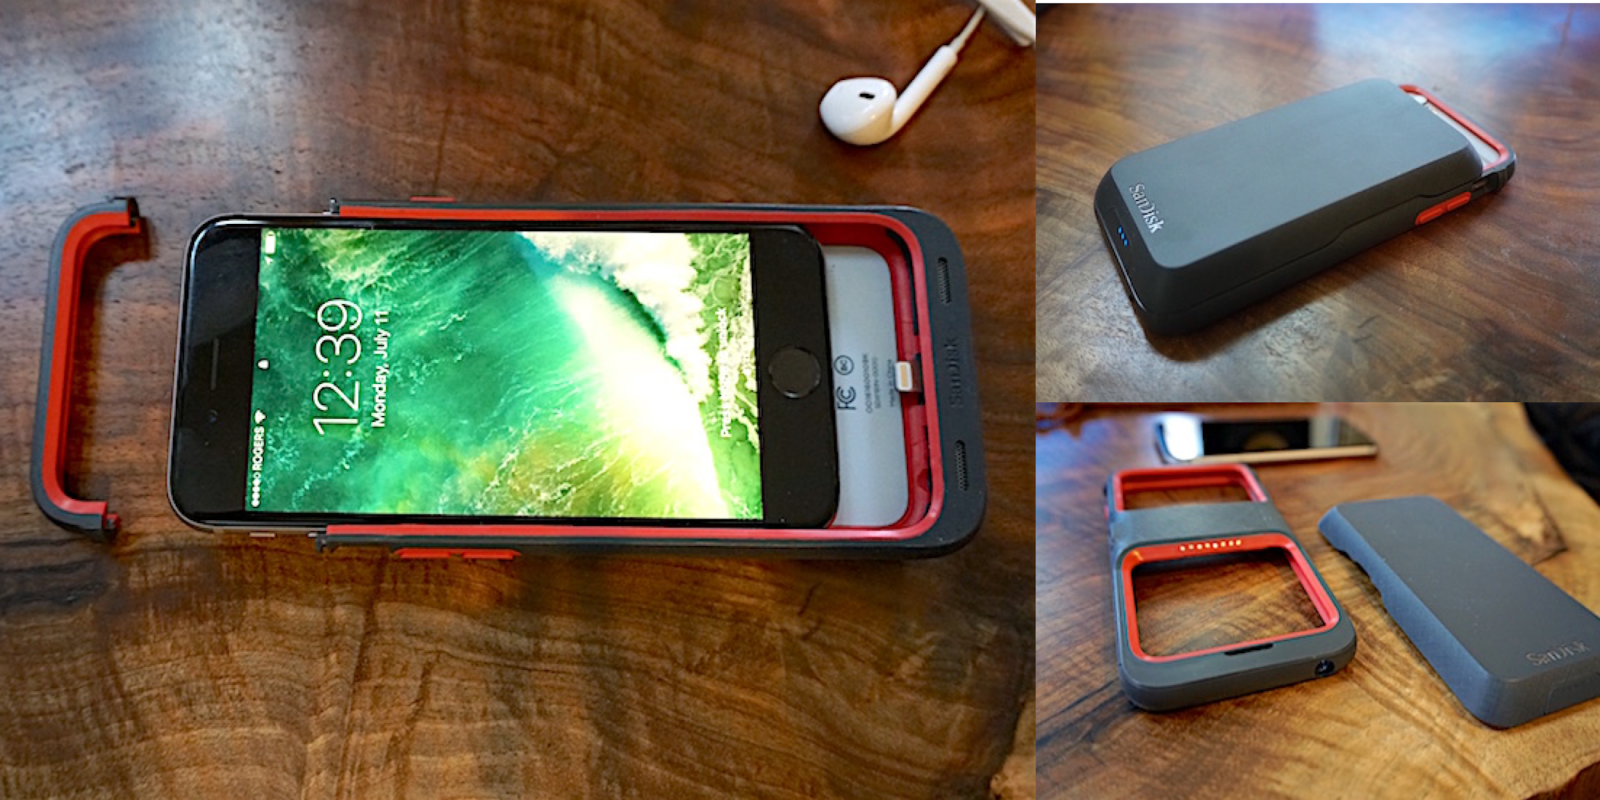 Review: SanDisk's Memory Case adds up to 128GB storage extra battery to iPhone 6/6s - 9to5Mac